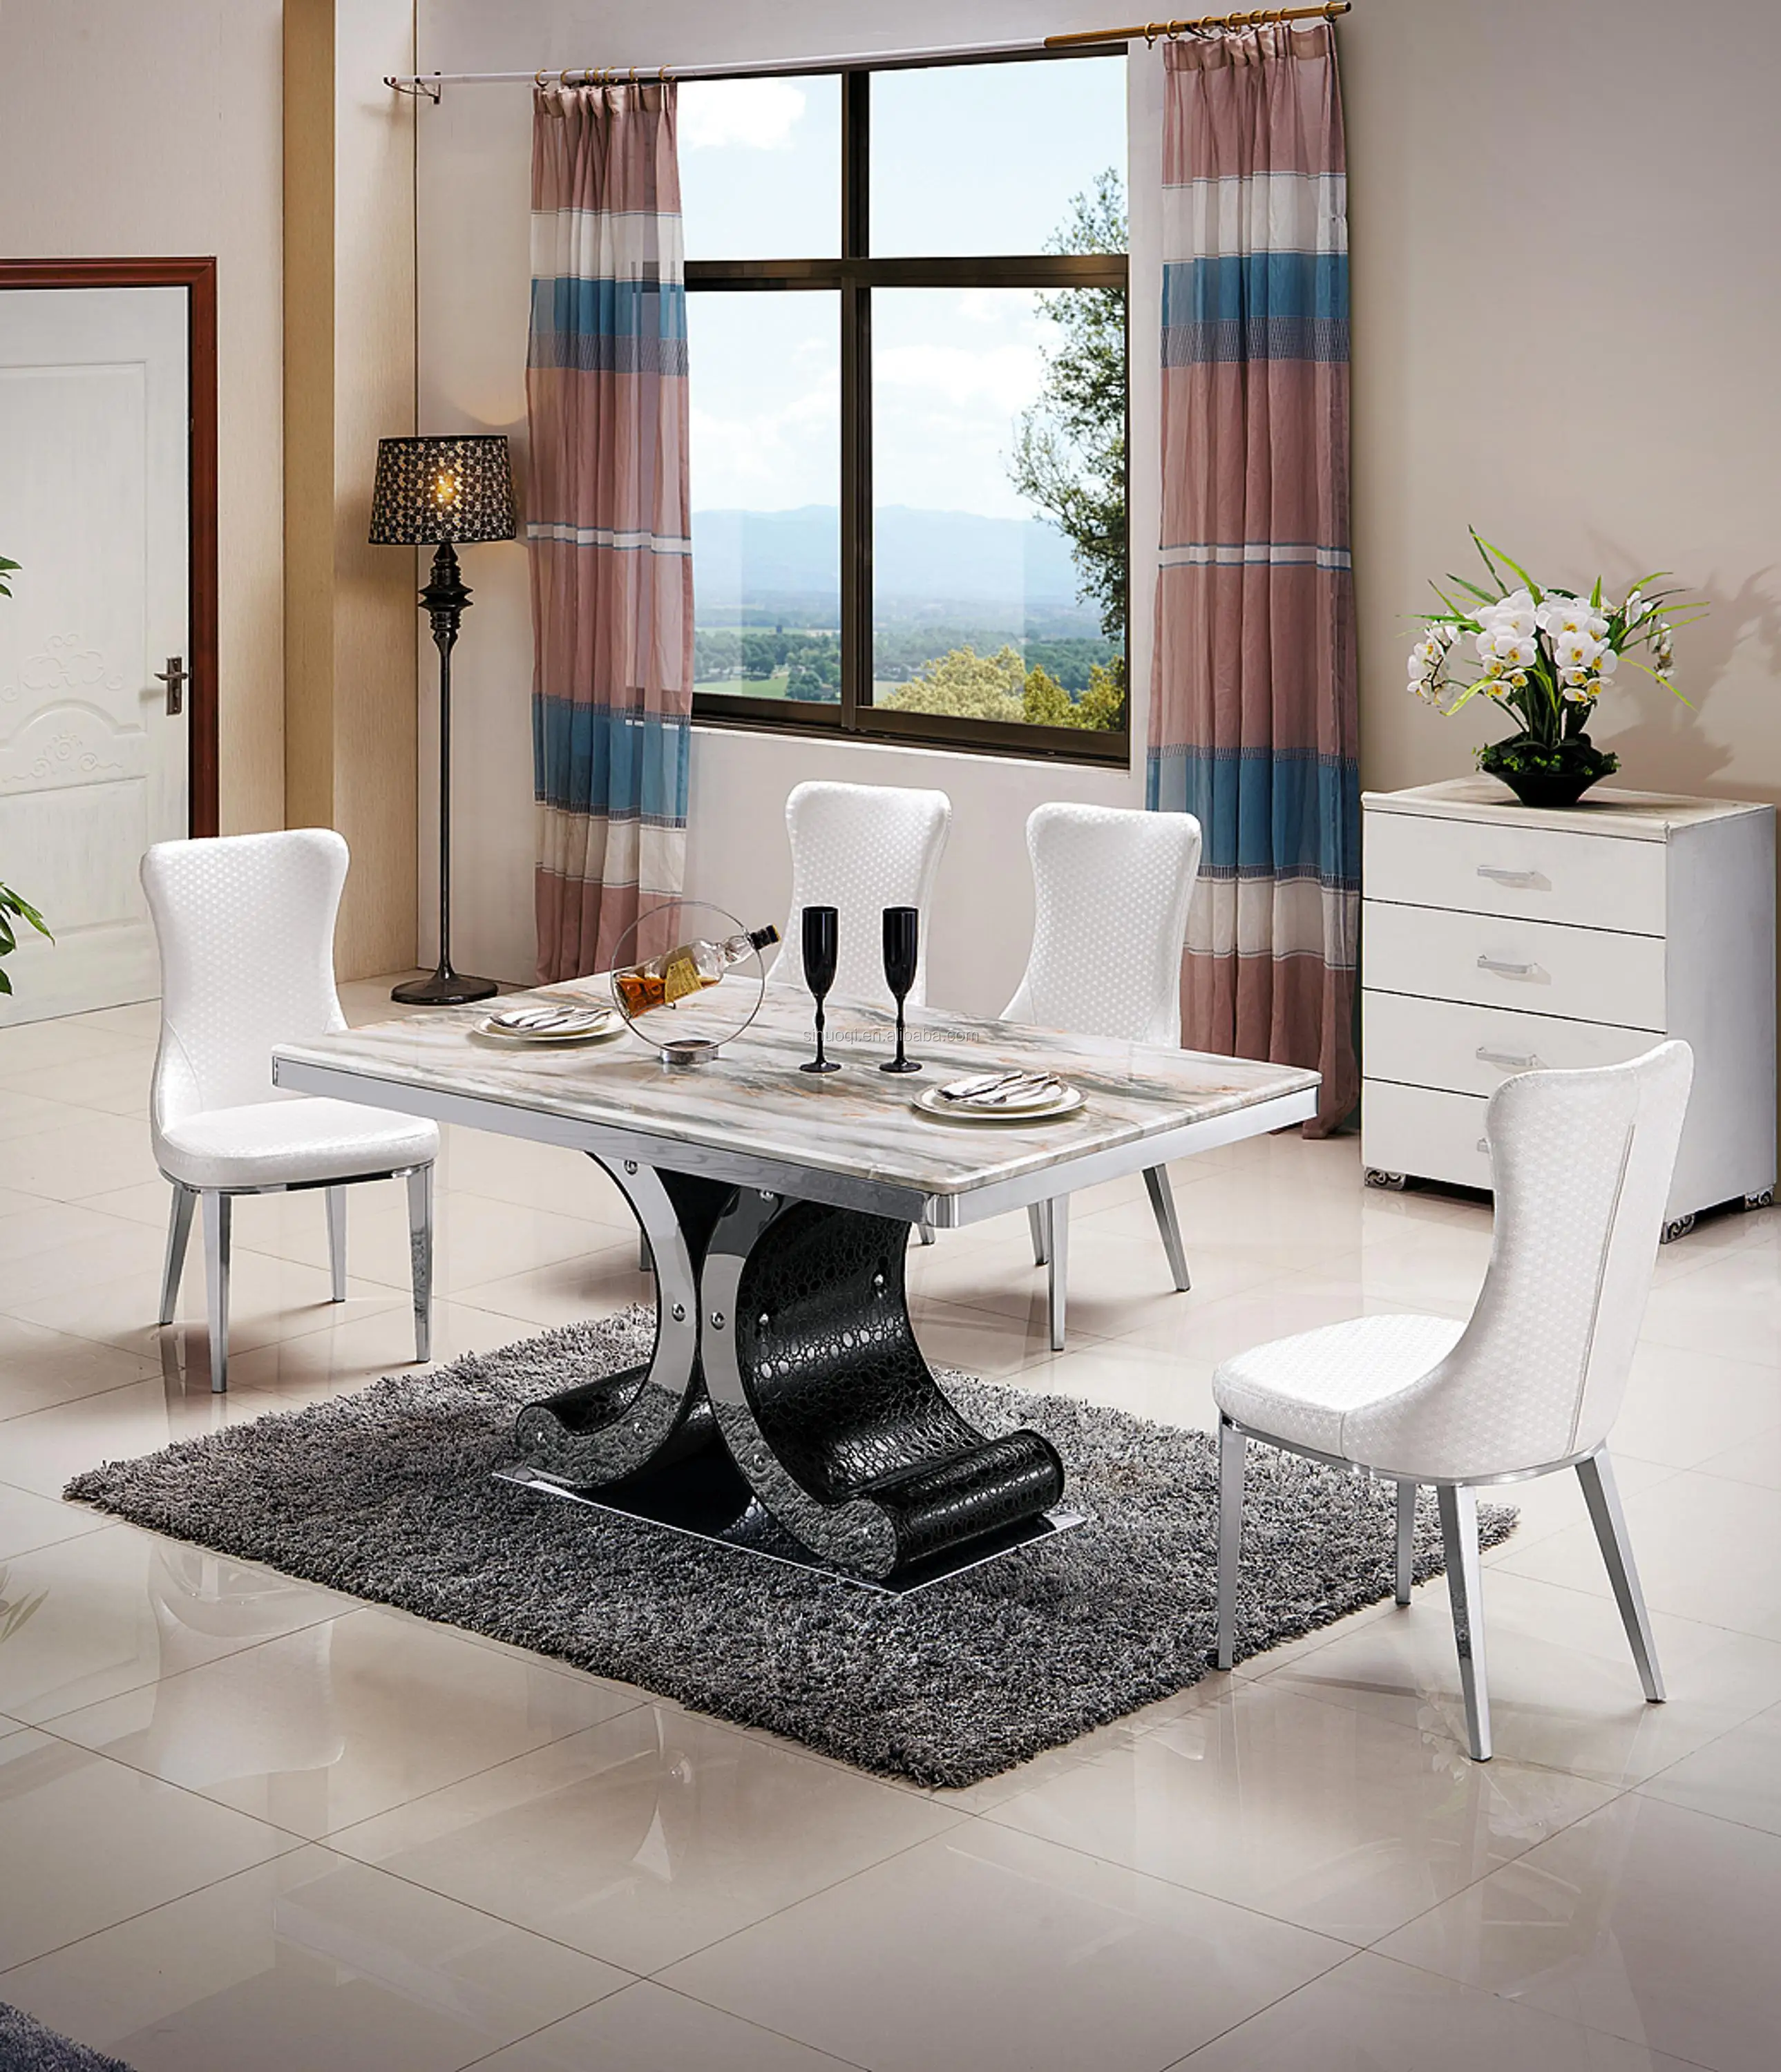 Hot Sale Cc Designs Marble Dining Table Set 8 Seater Marble Dining